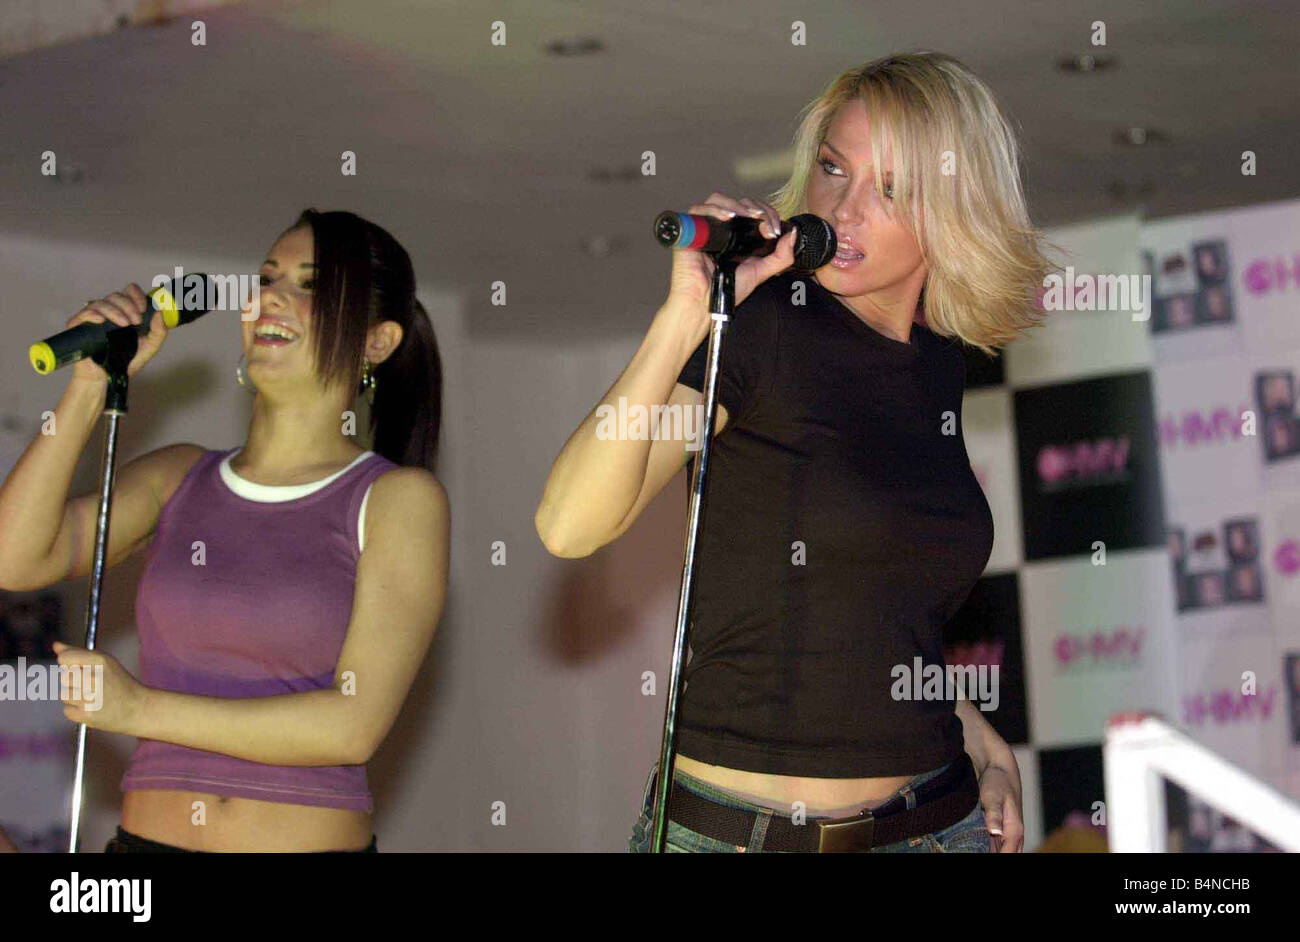 Girl band Girls Aloud launch their first single at the Trafford Centre Pictured are Cheryl Tweedy and Sarah December 2002 Stock Photo